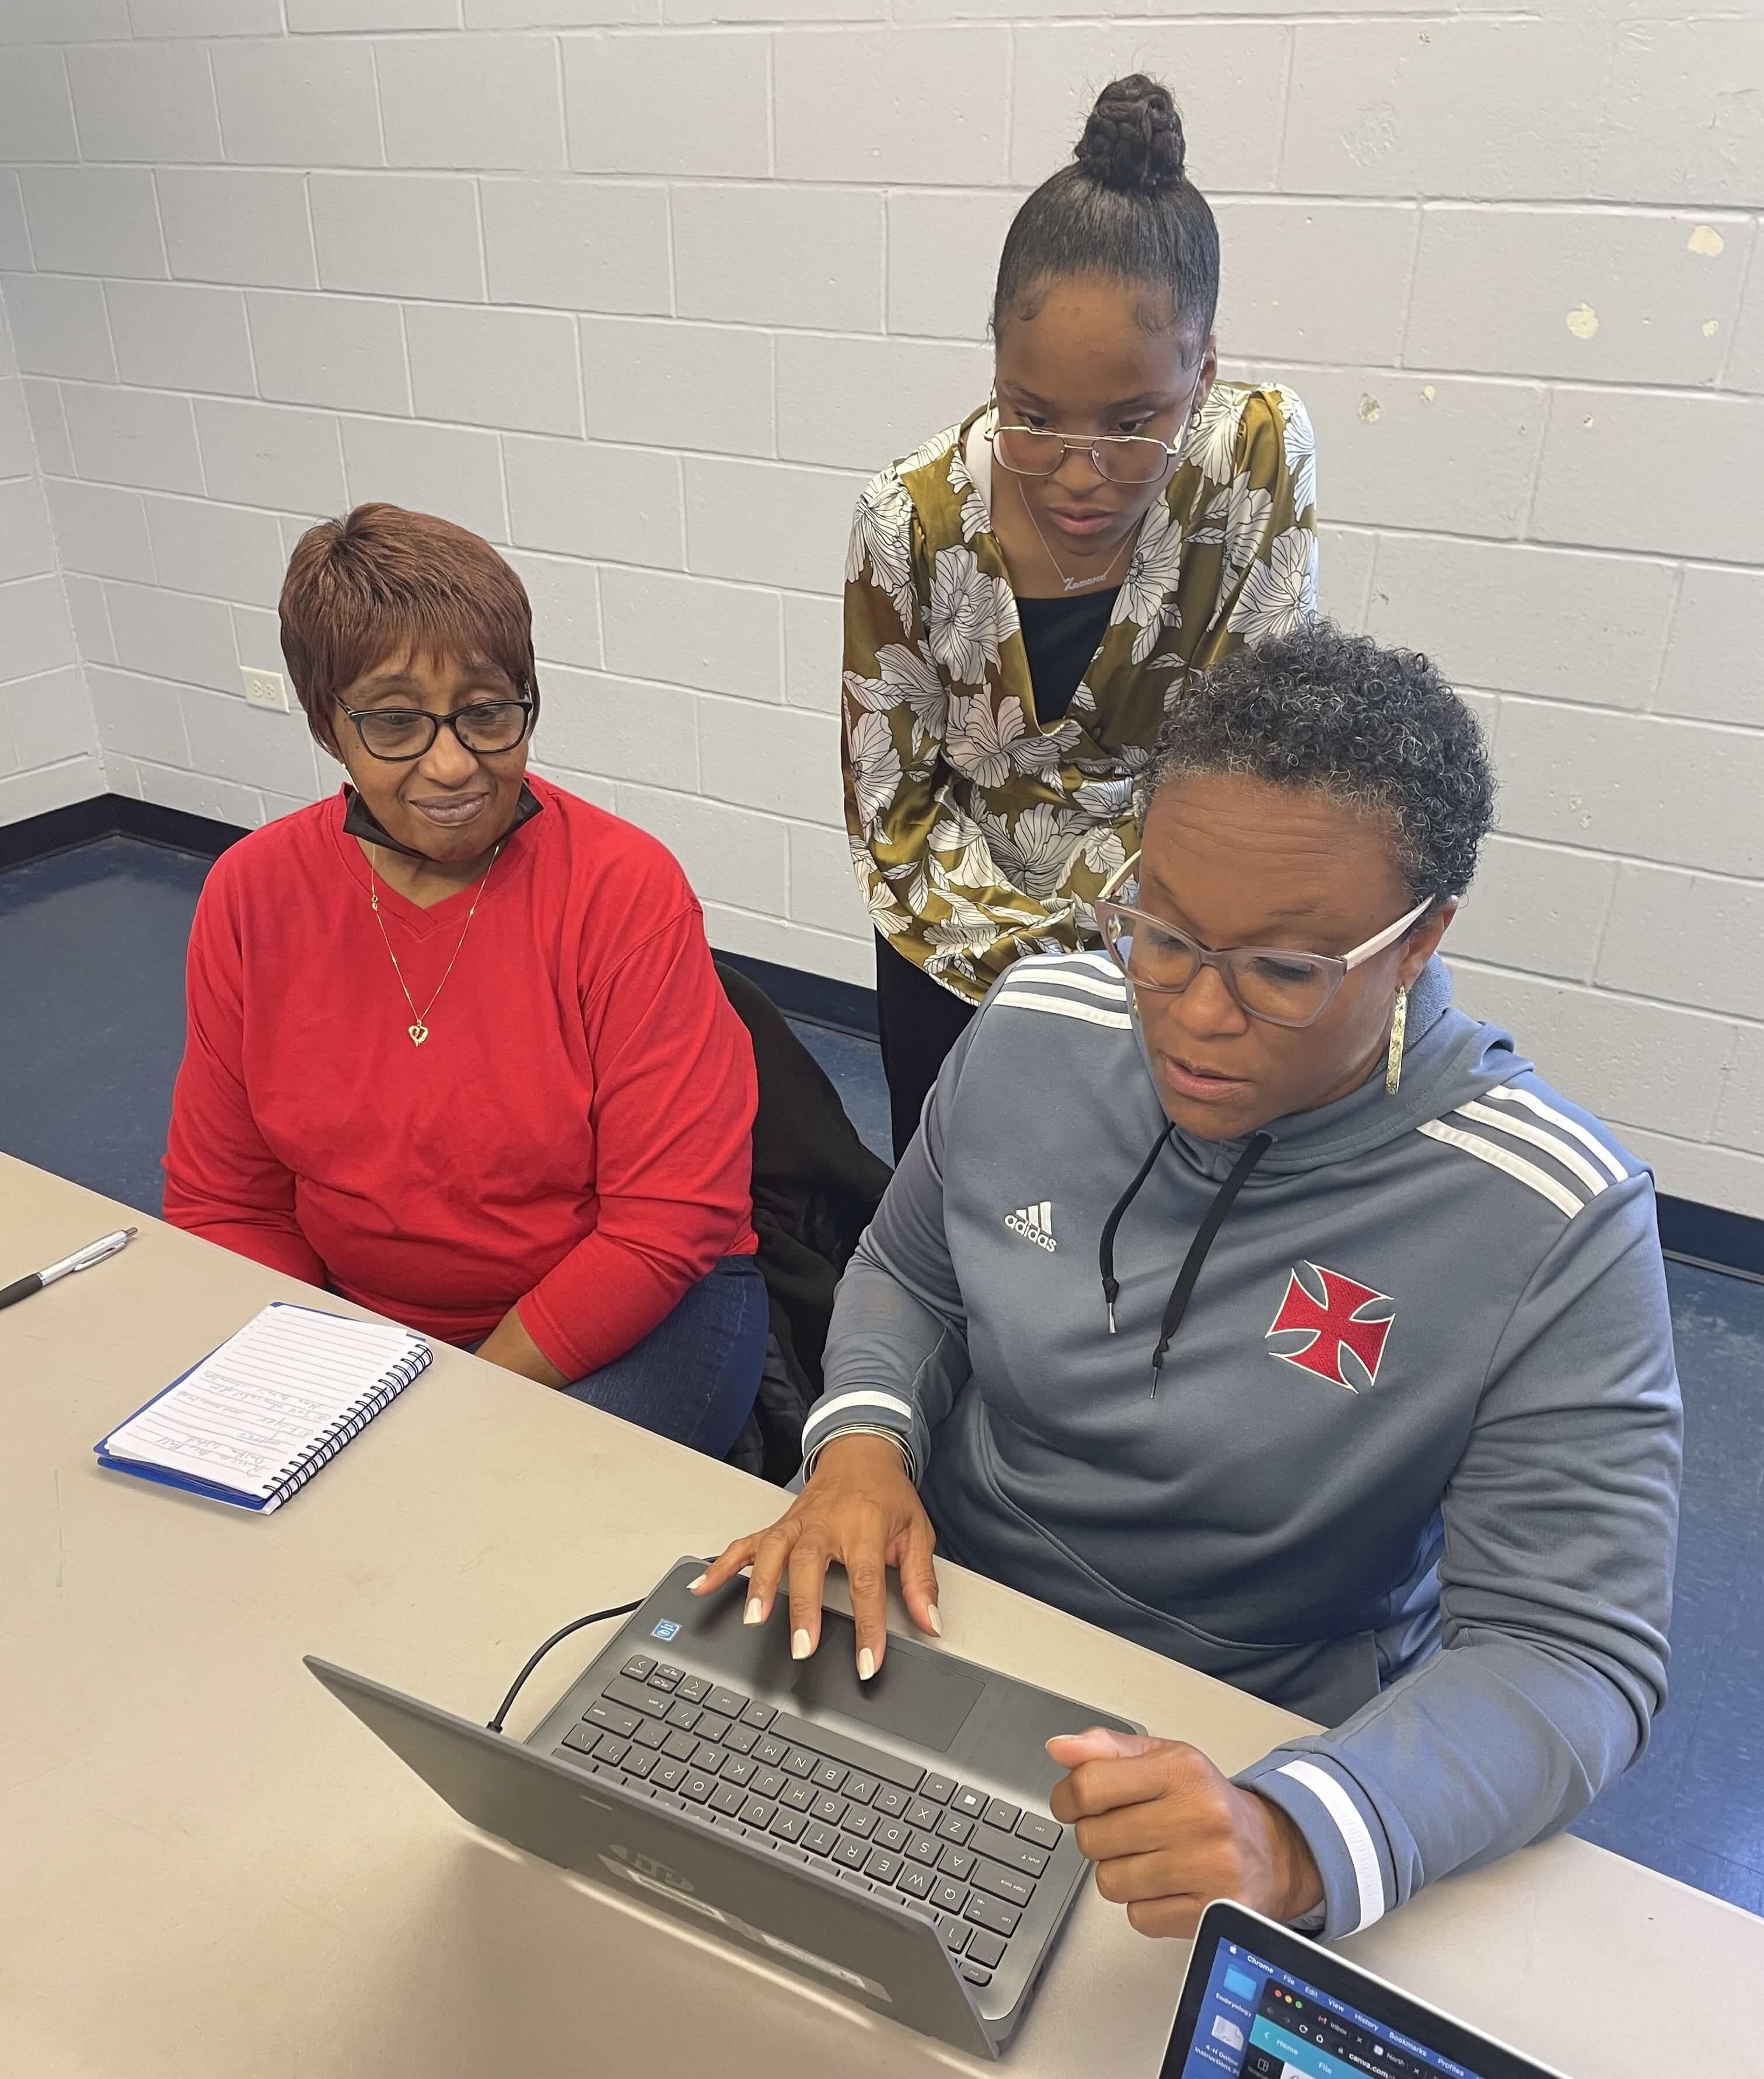 Zamaria Kinsey stands to help two women at a computer